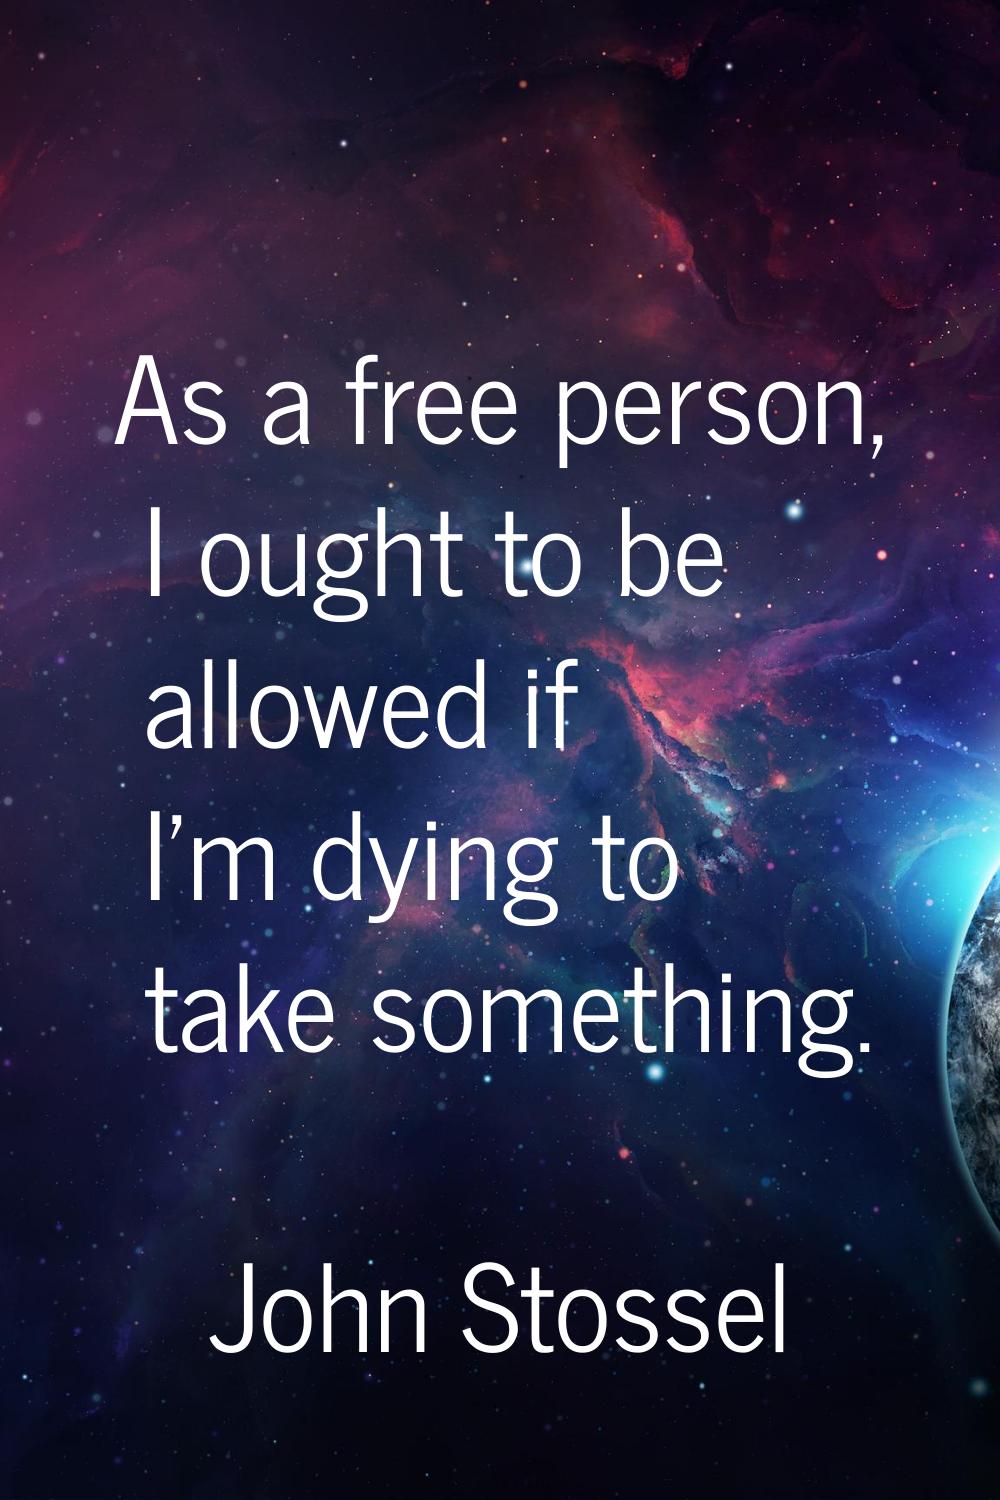 As a free person, I ought to be allowed if I'm dying to take something.